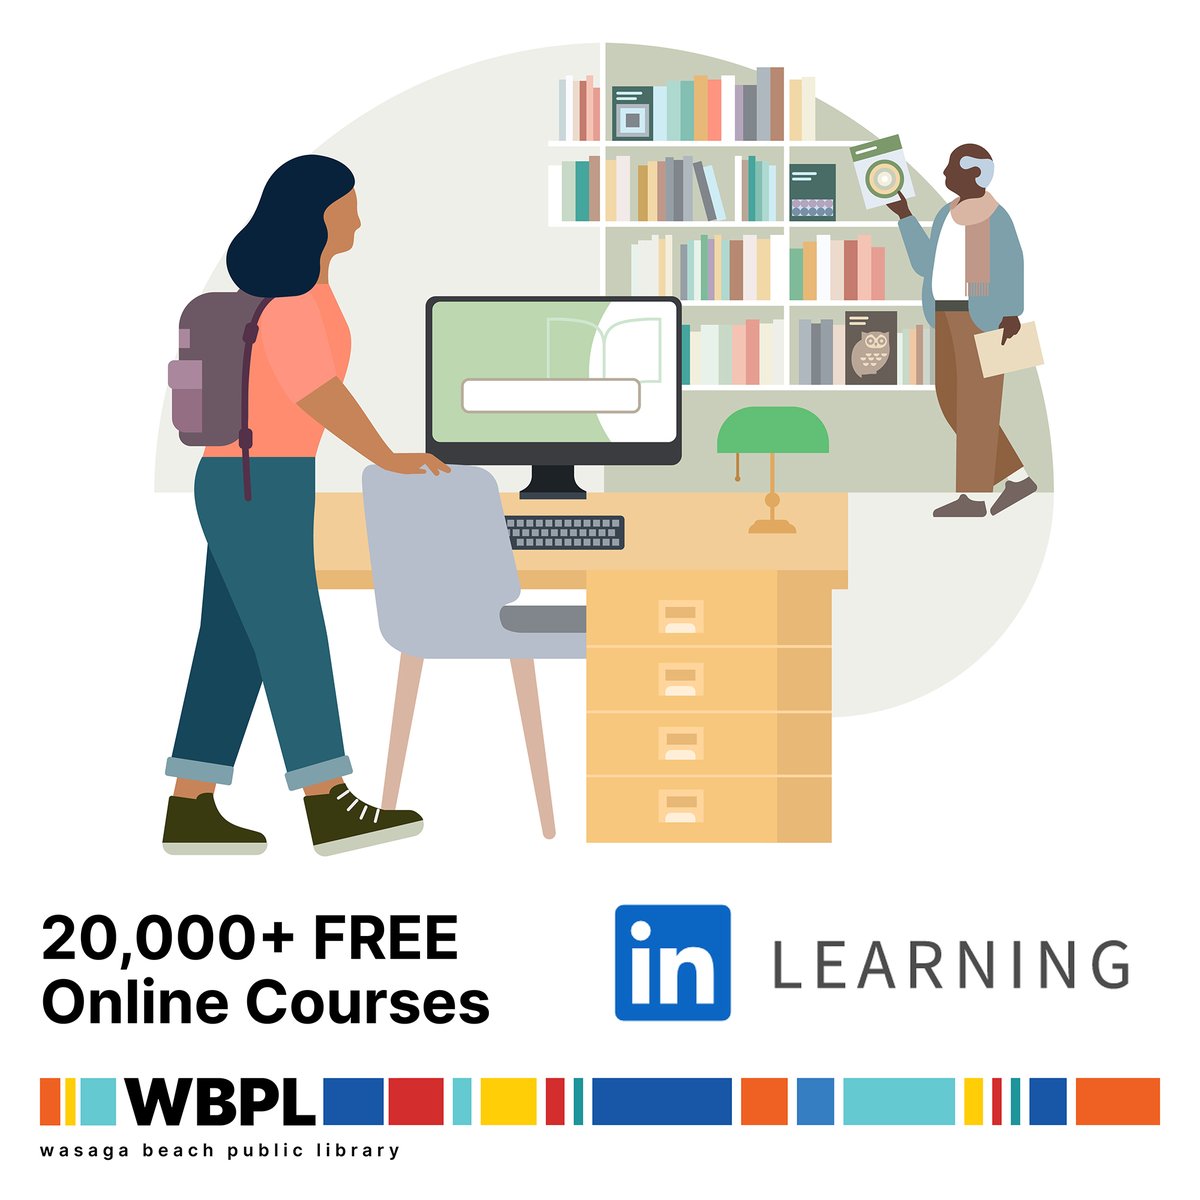 Unlock your potential with LinkedIn Learning, free with your library card! 📚 Access over 20,000 courses across Business, Creative, Technology, and Certifications. #LinkedInLearning #FindItHere #WasagaBeach Get started here: ow.ly/Gk9450RYUaH